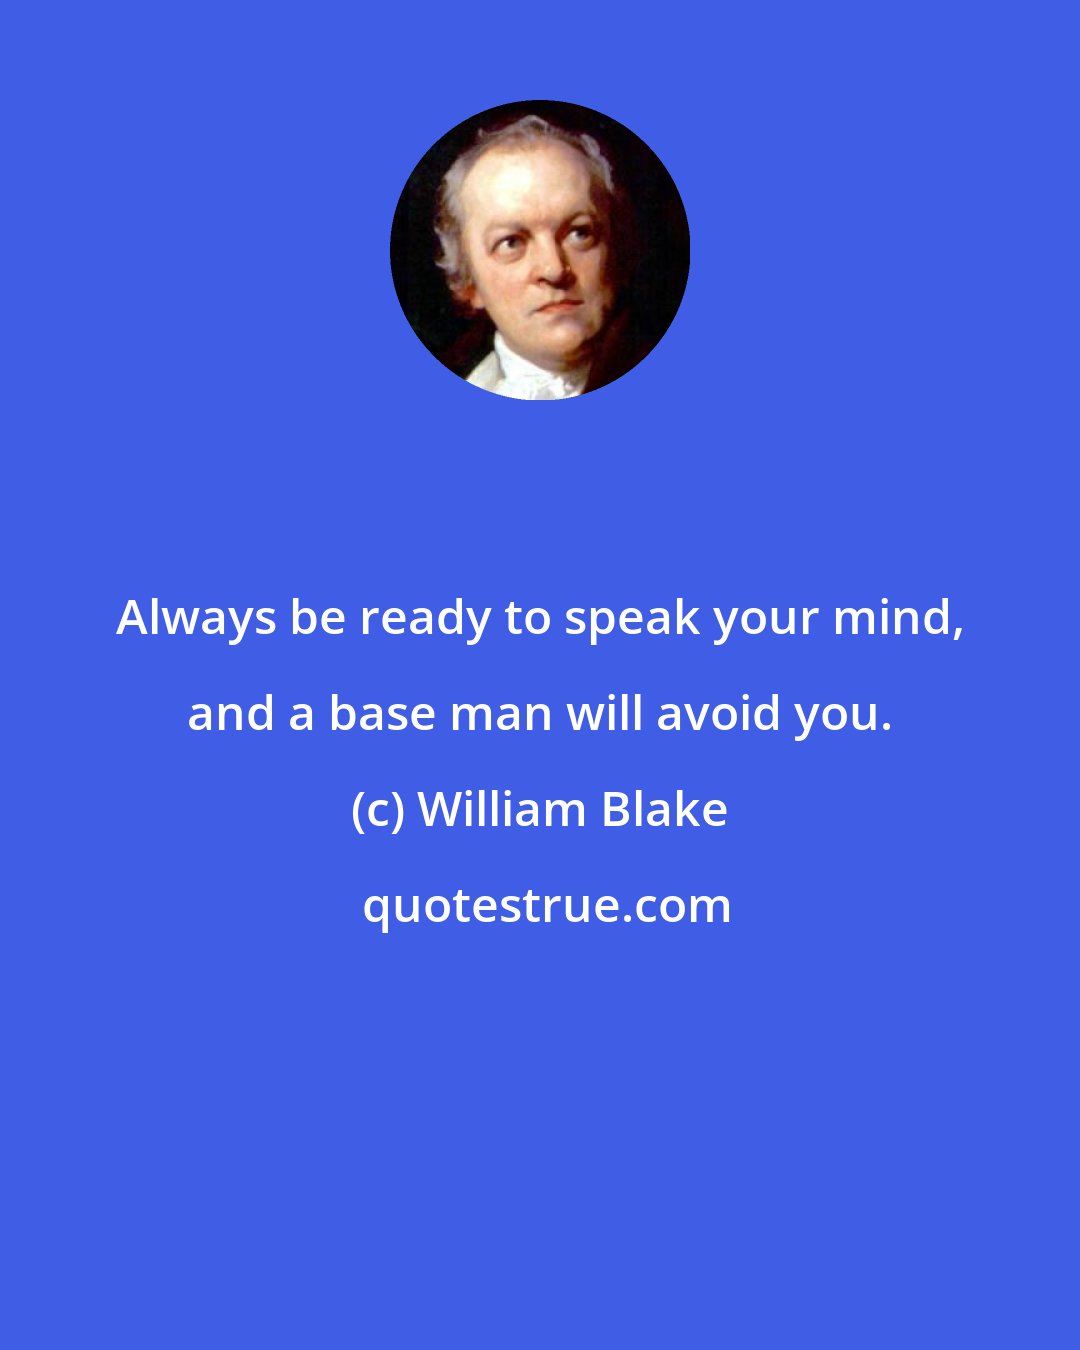 William Blake: Always be ready to speak your mind, and a base man will avoid you.